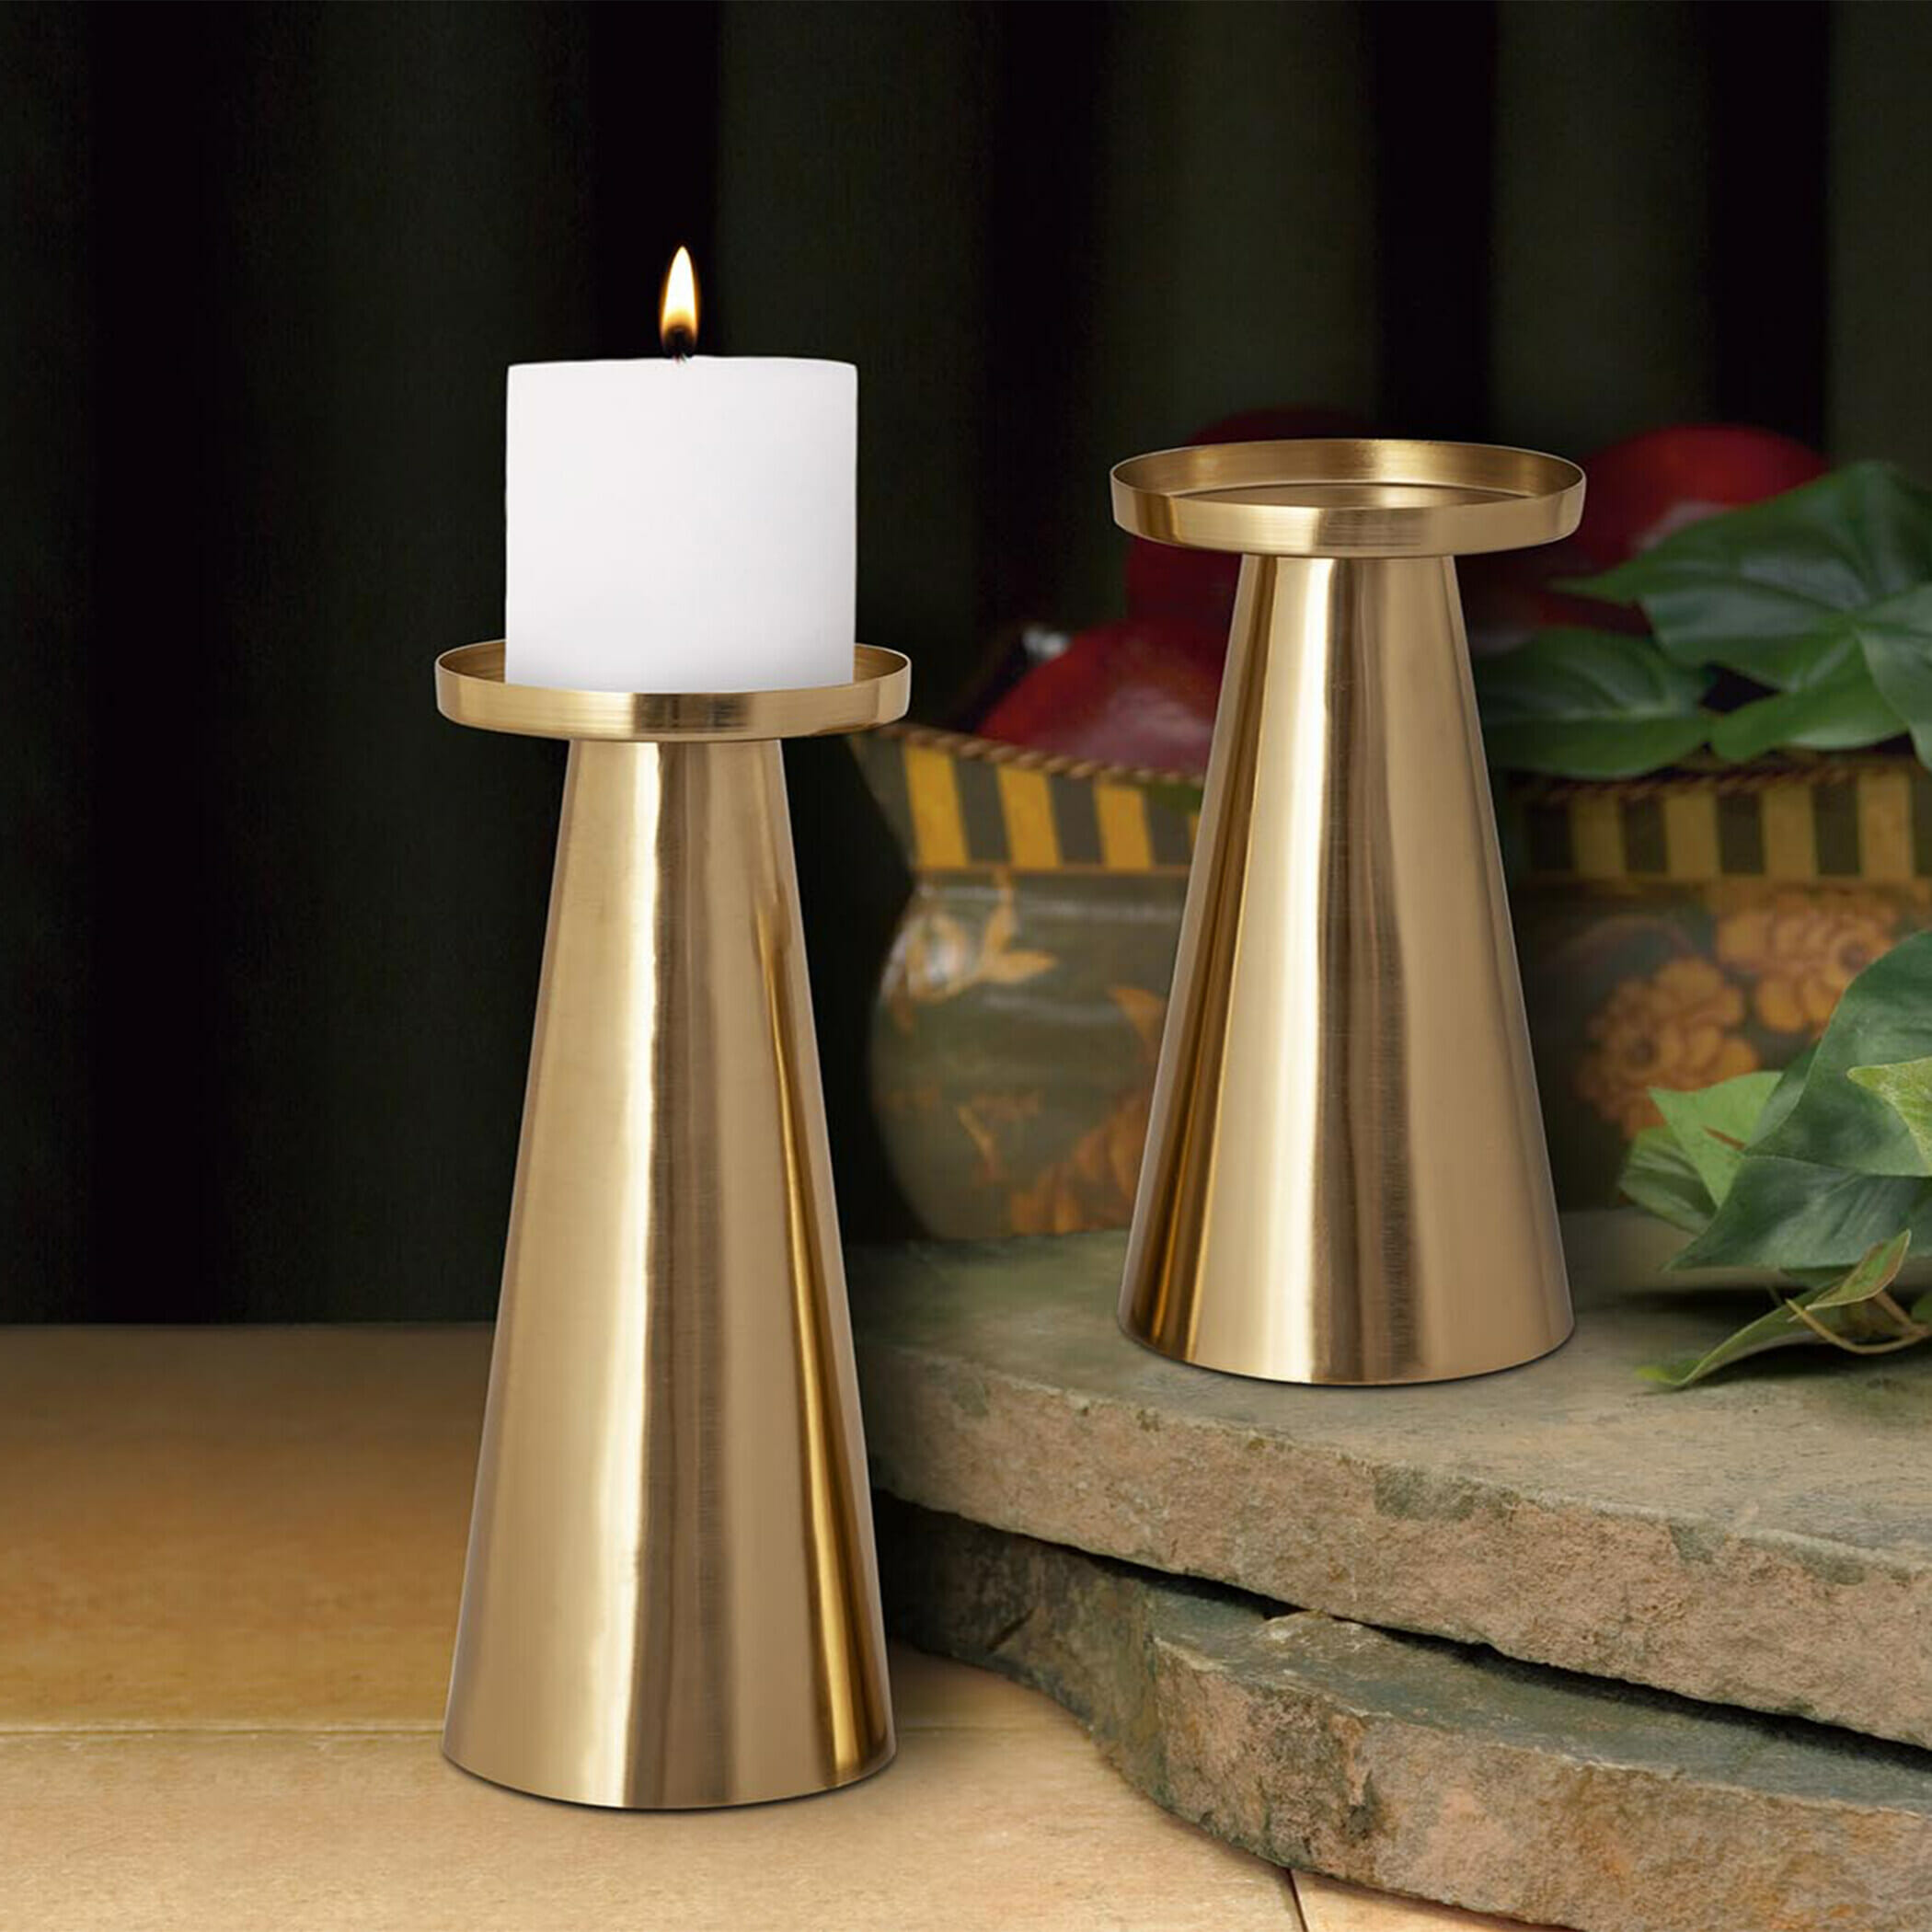 Cone Candle Holders-Set Of 2 - Kaniry Home Decor